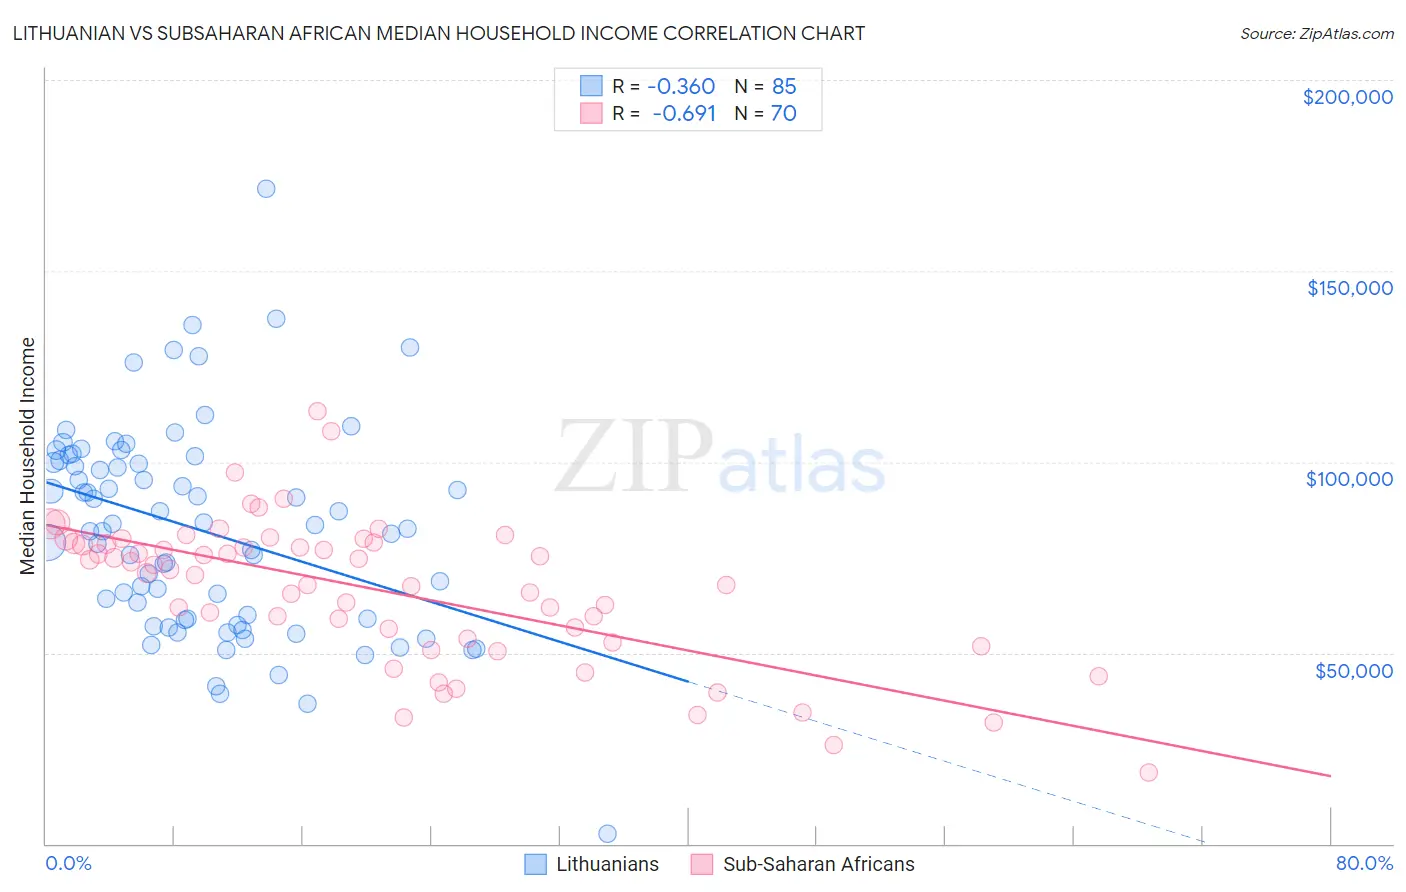 Lithuanian vs Subsaharan African Median Household Income